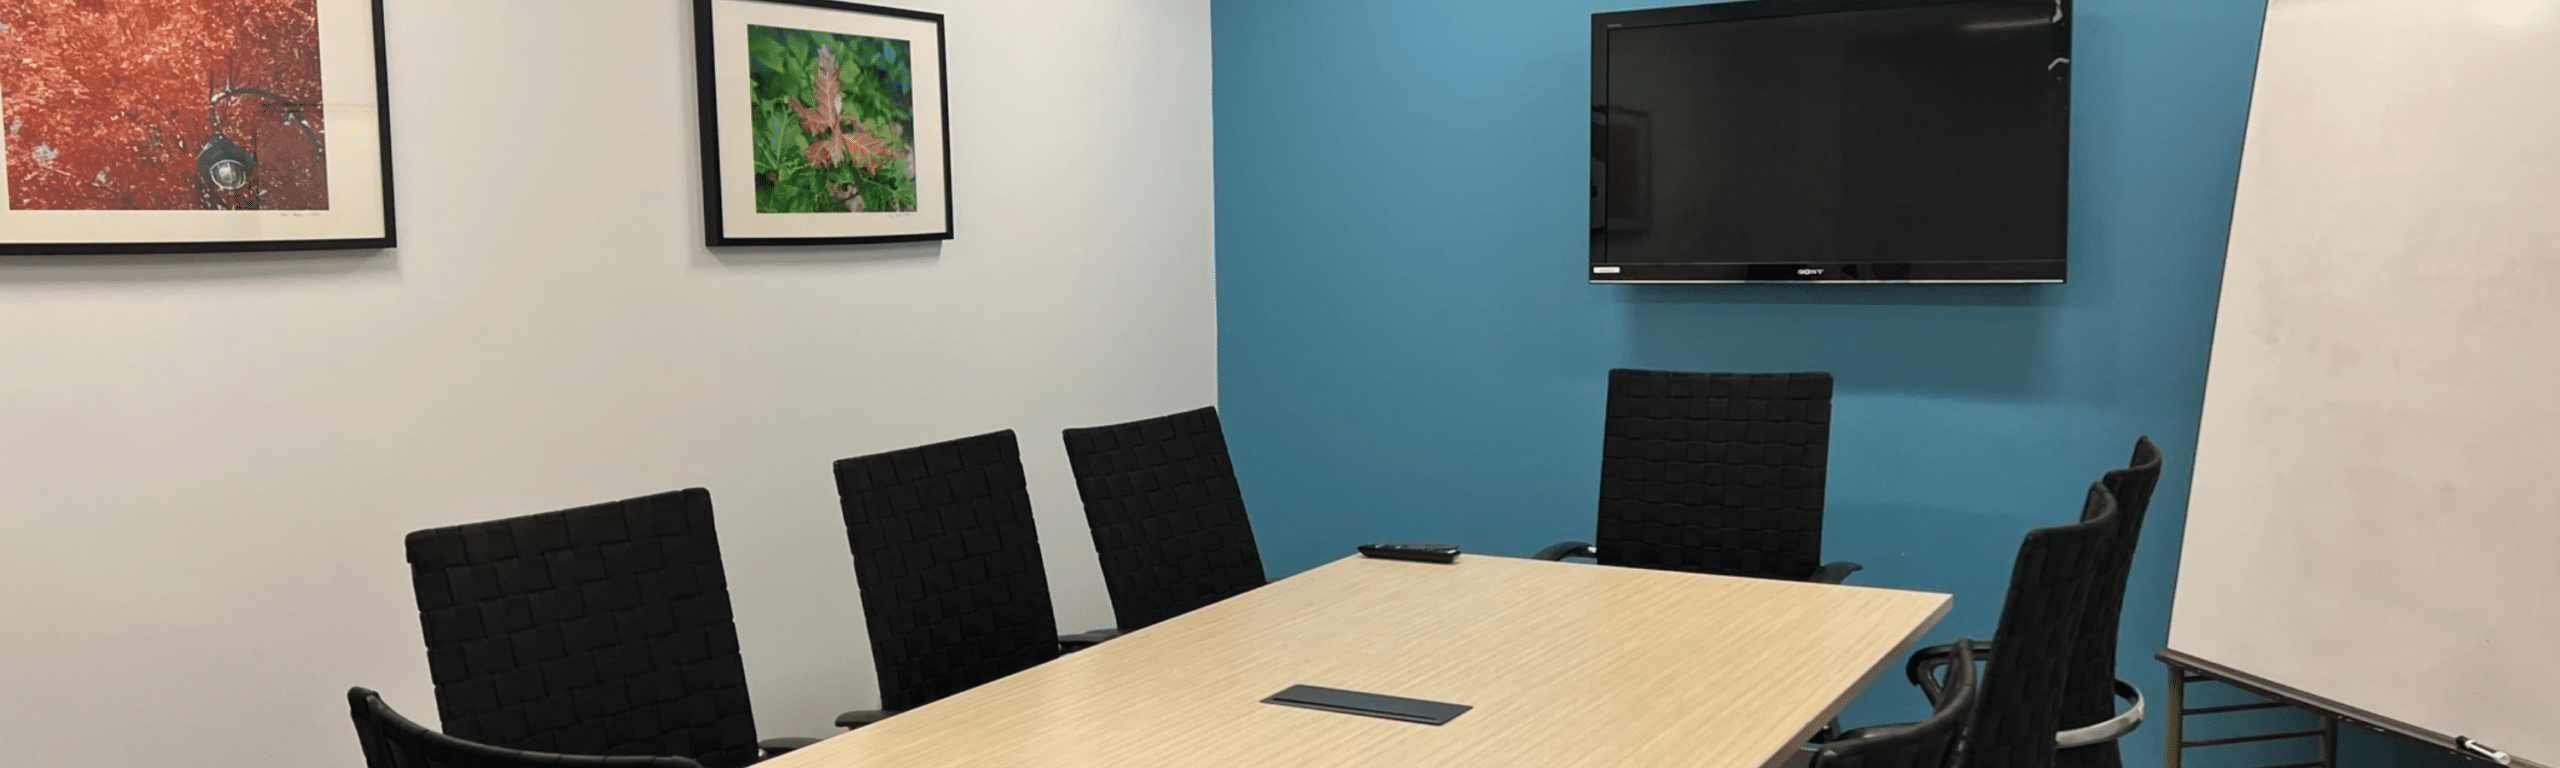 <h3 style="display: none;"> </h3>
<p>We provide flexible space to fit your needs, from shared workspaces to private offices and conference rooms.</p>
